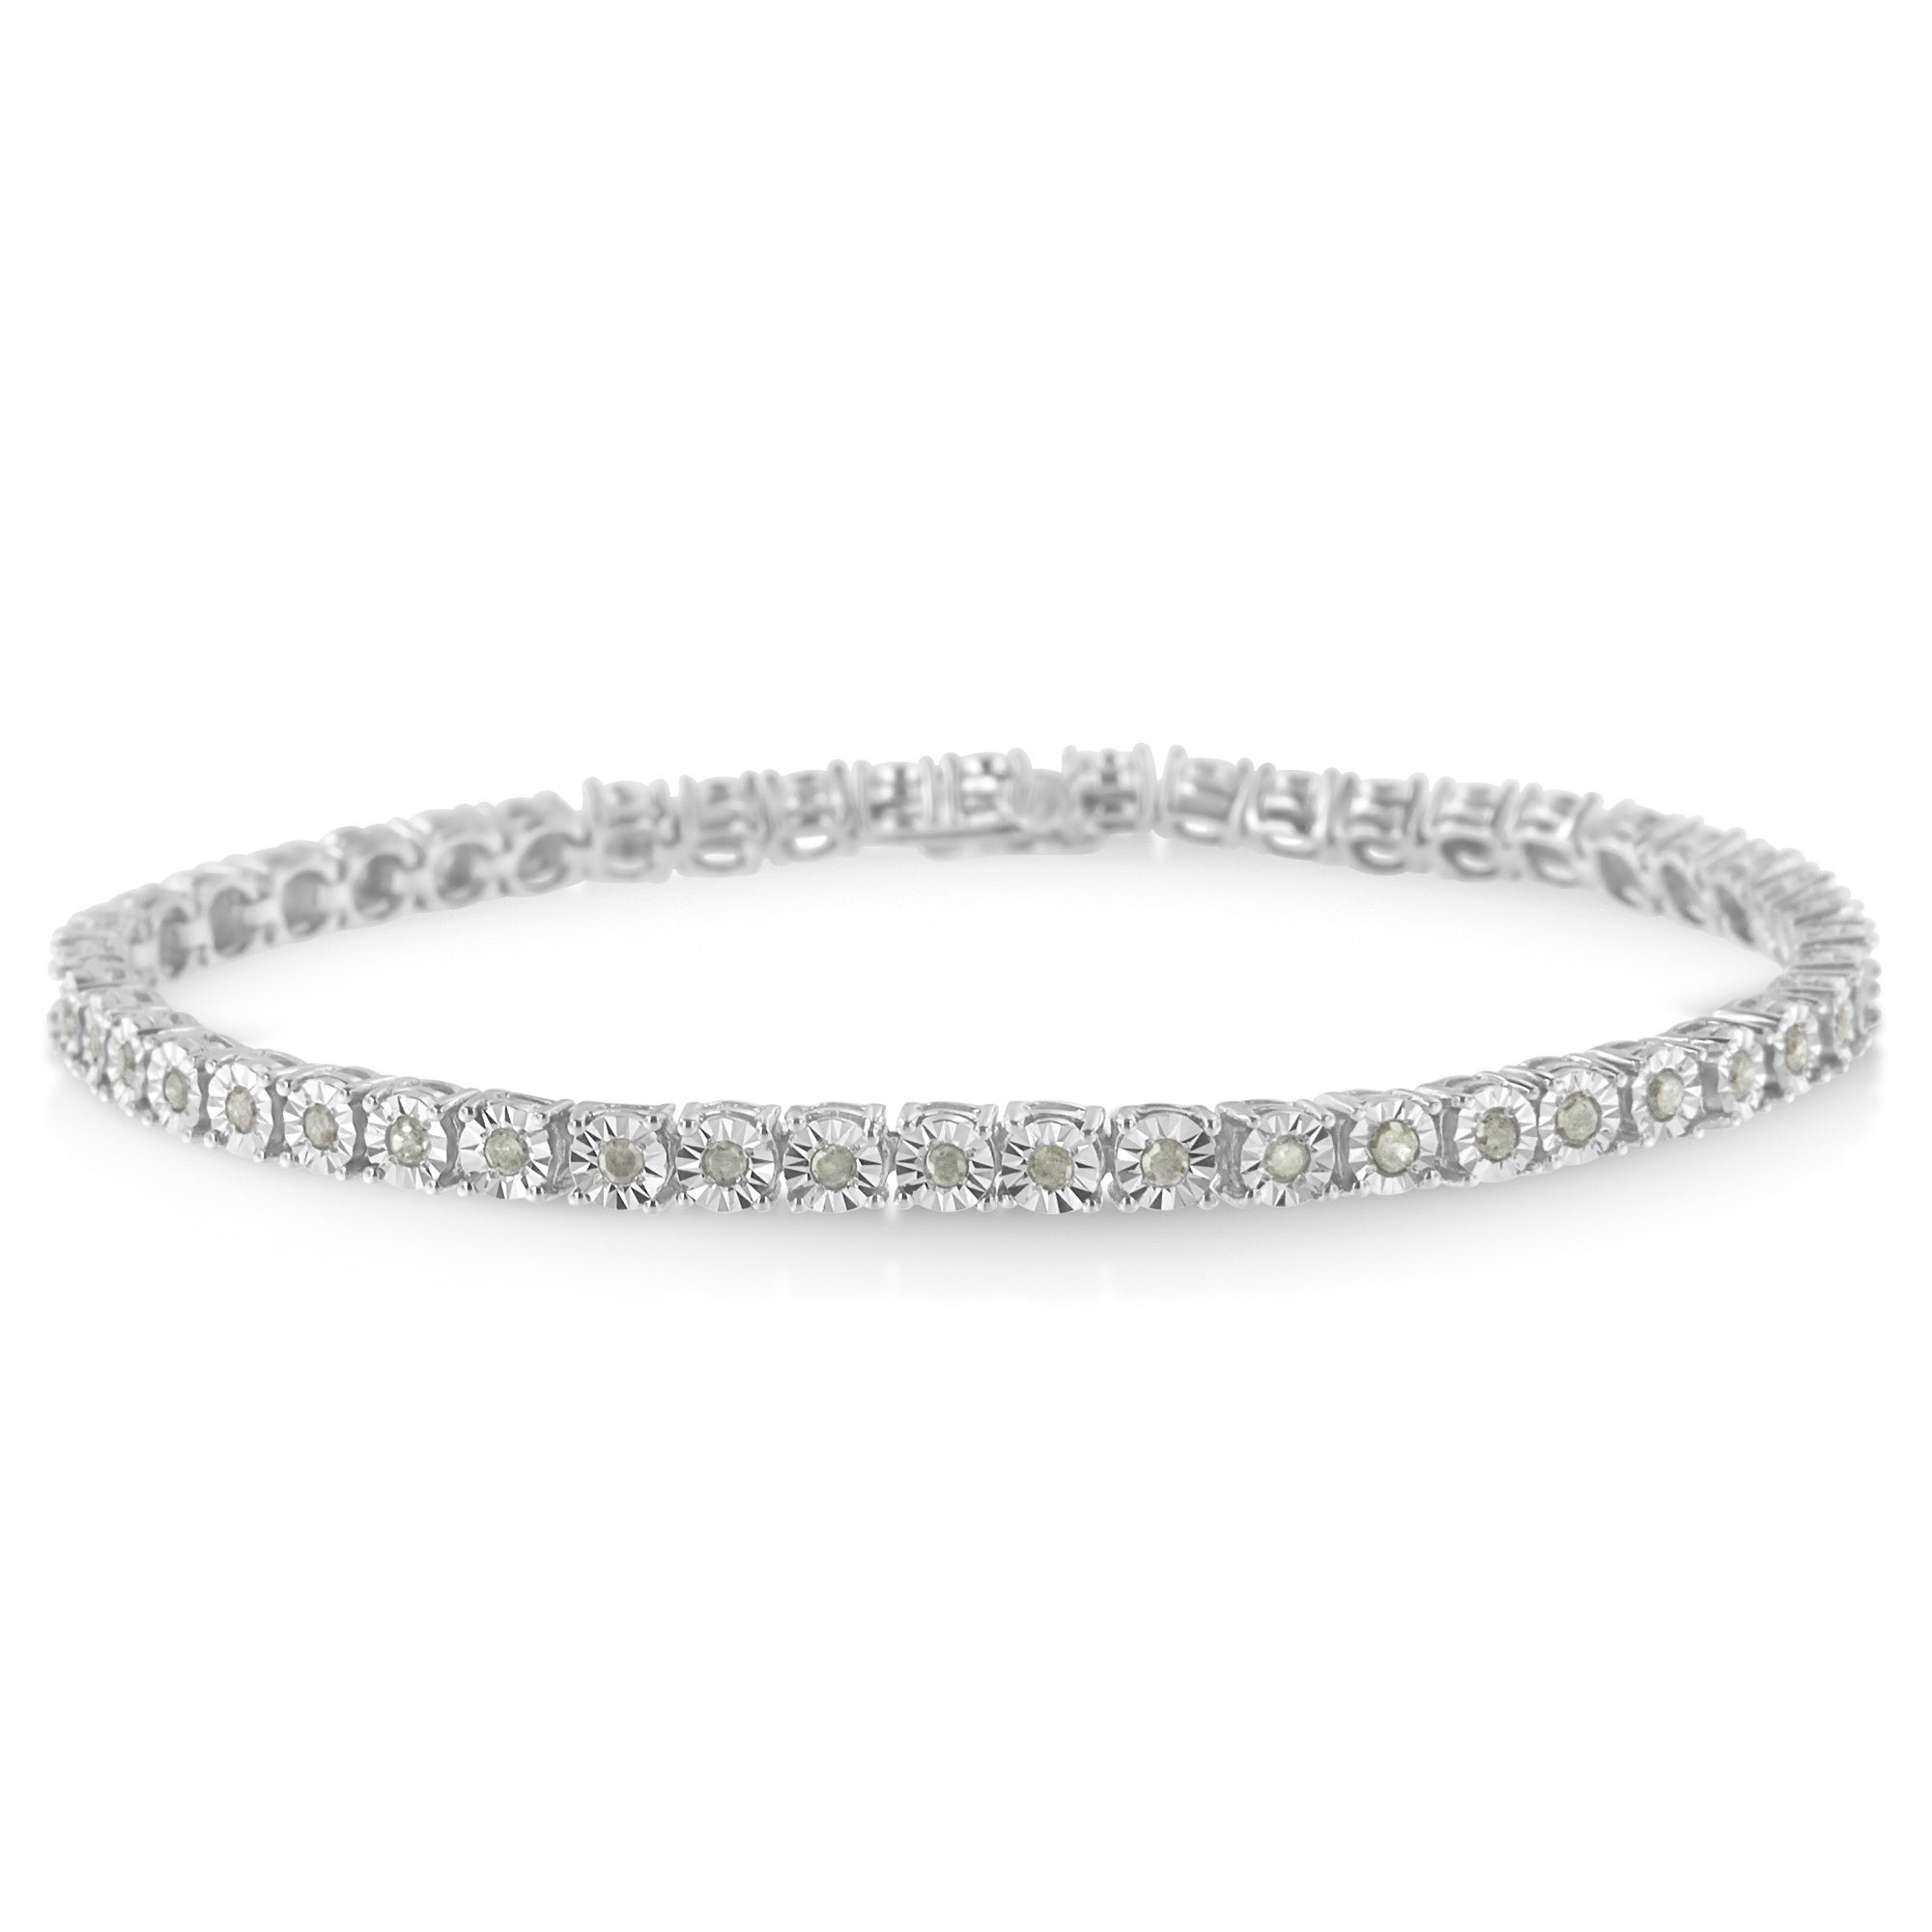 Princess Kylie Clear Cubic Zirconia Tri Color Circle Beaded Bracelet Rhodium Plated Sterling Silver 